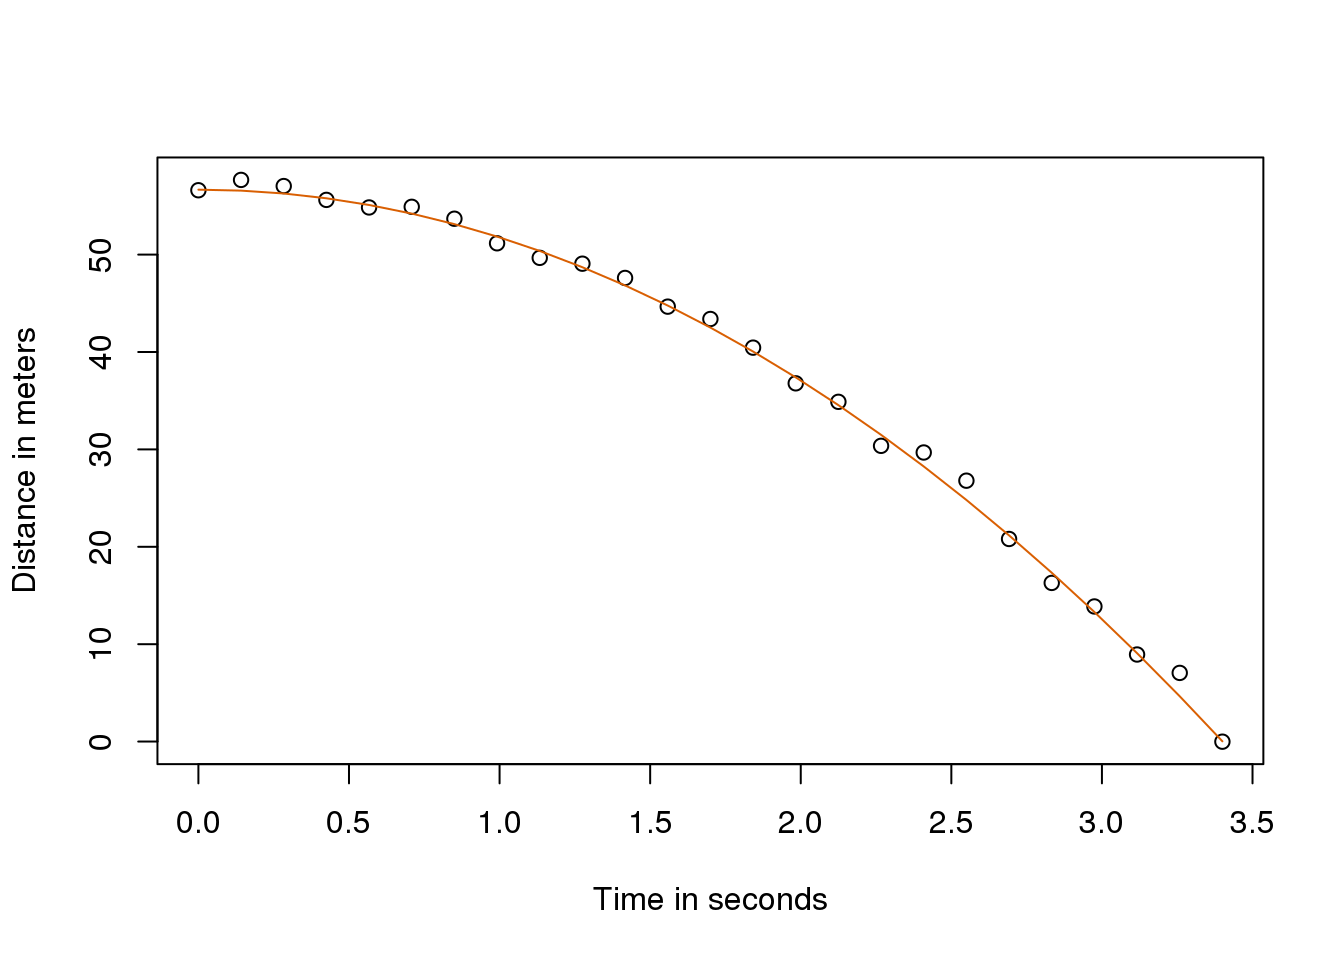 Fitted model for simulated data for distance travelled versus time of falling object measured with error.